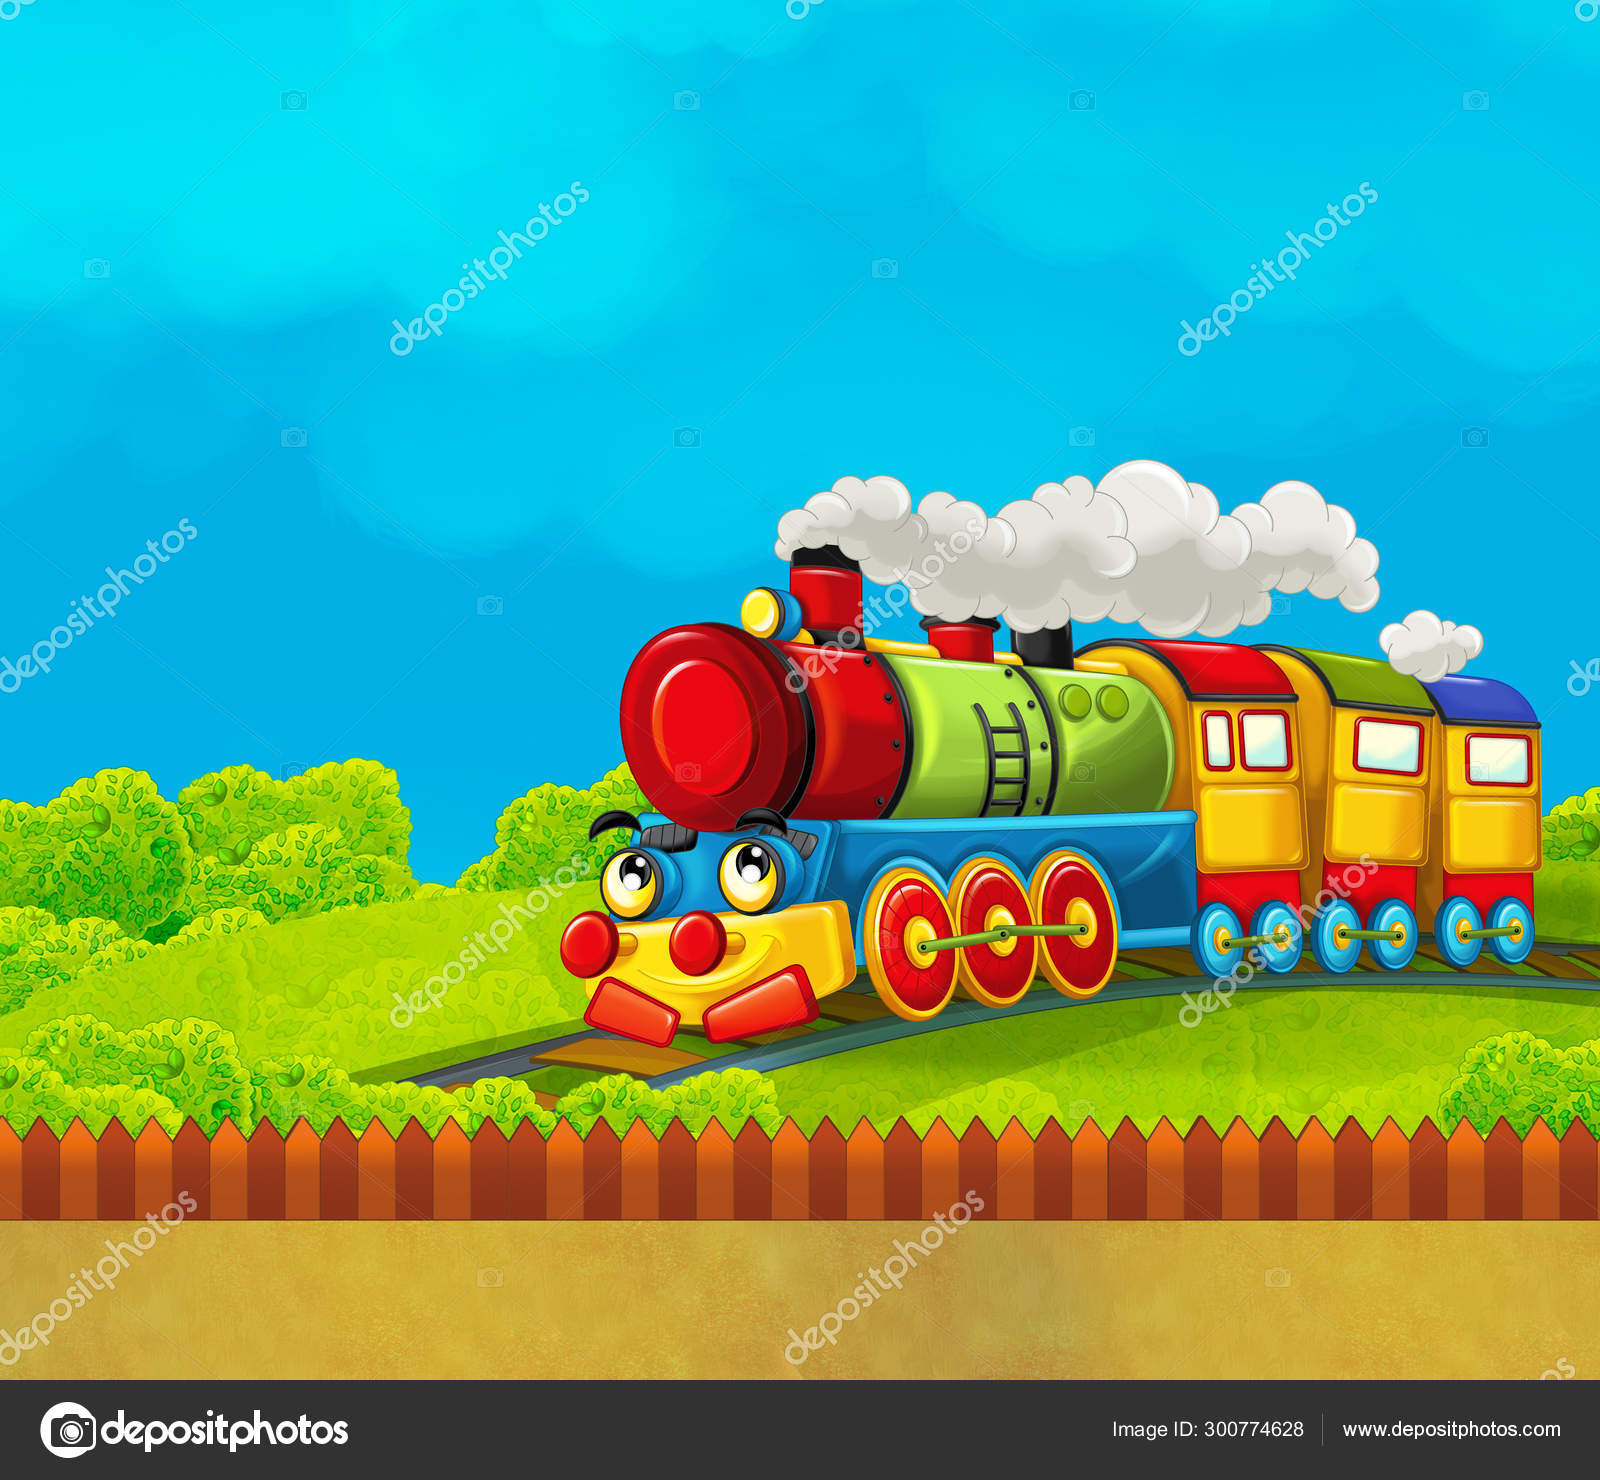 Cartoon funny looking steam train going through the city - illustration for  children Stock Photo by ©illustrator_hft 300774628